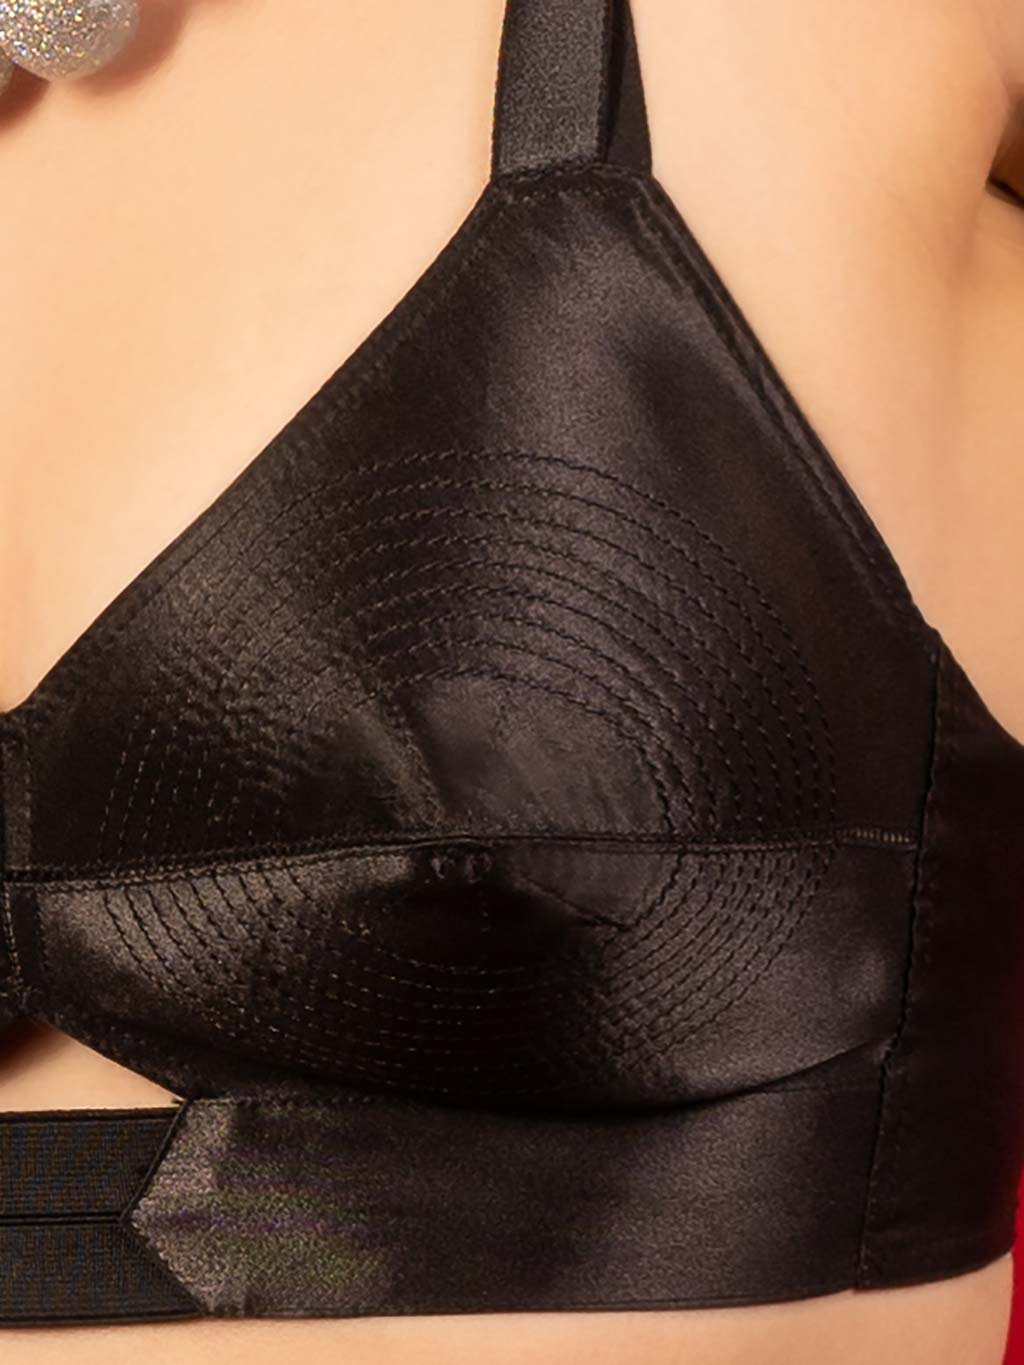 Discover Timeless Elegance with our Black Satin Bullet Bra - What